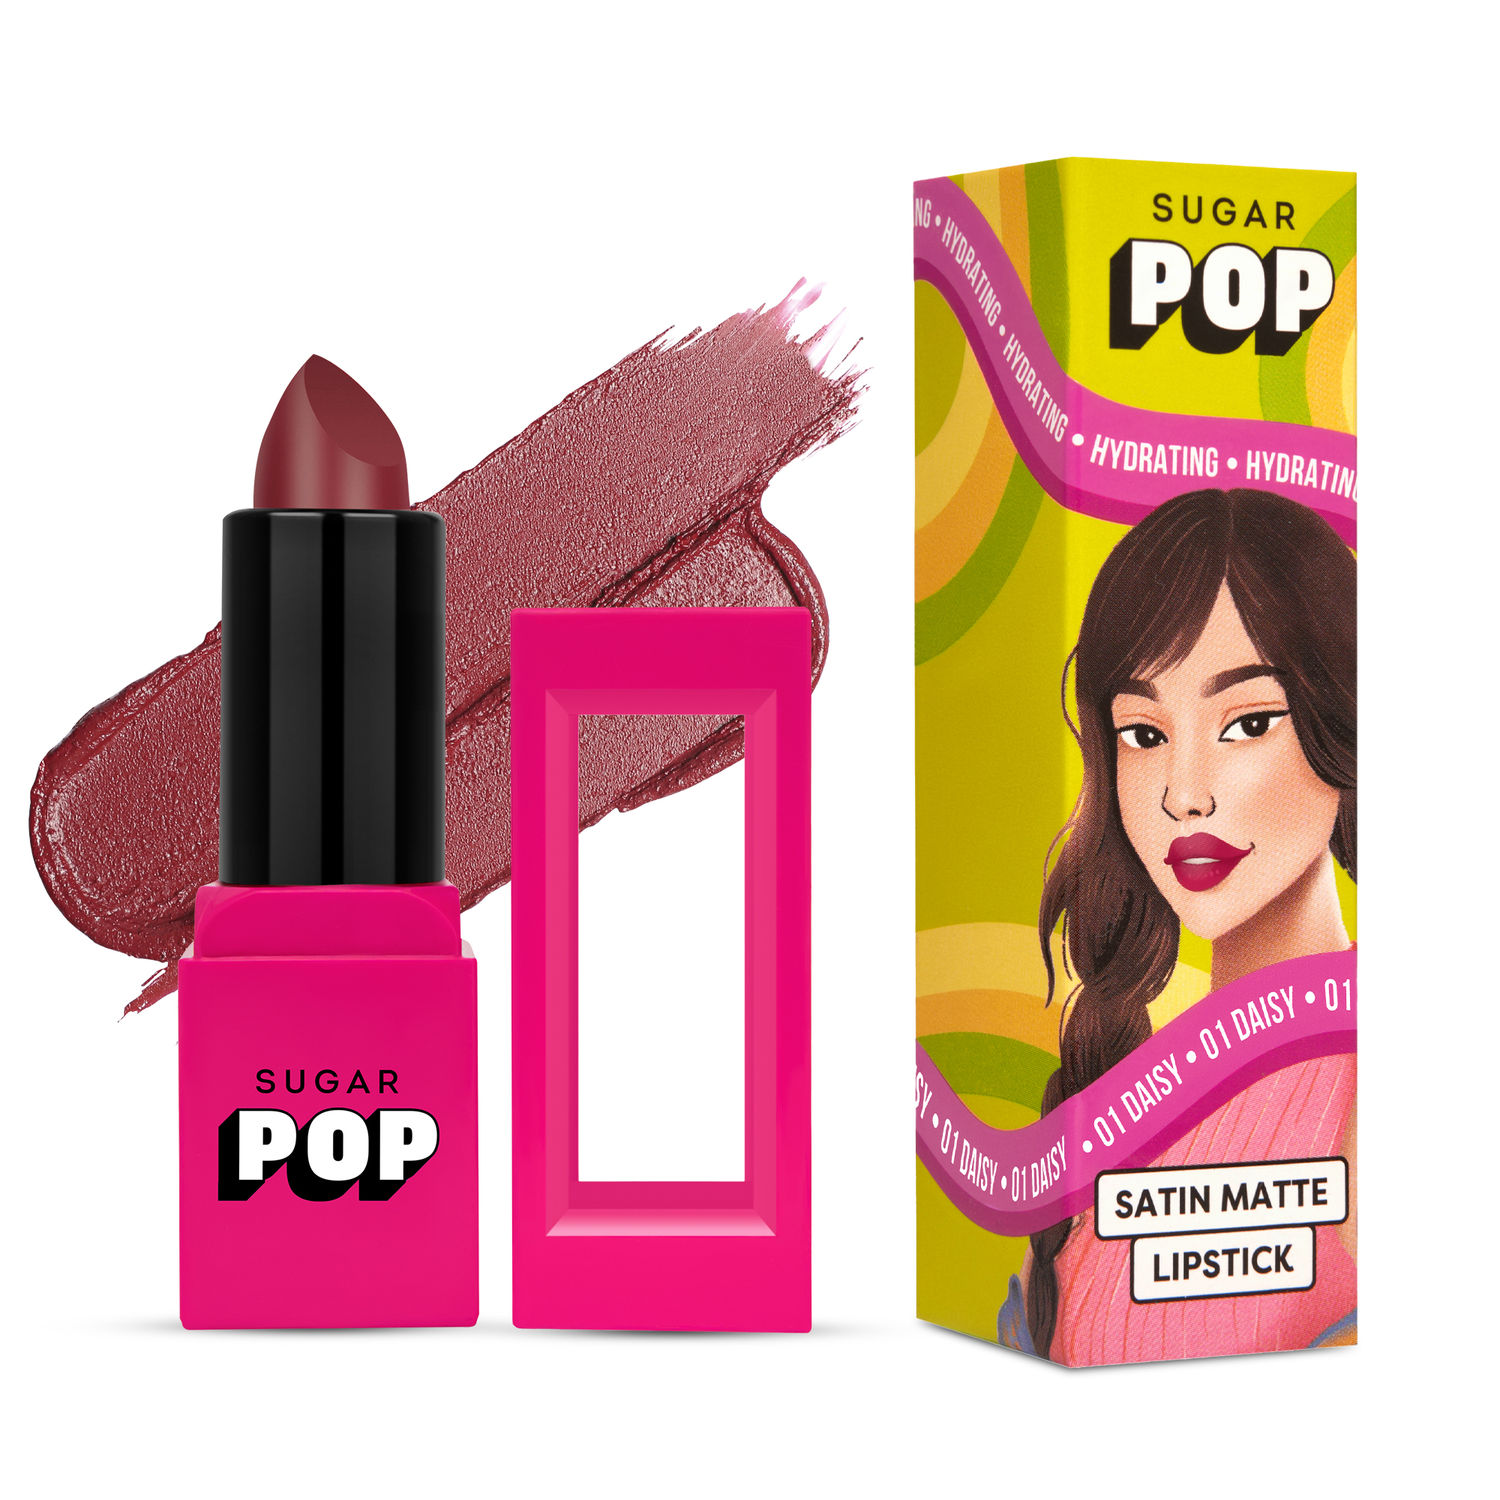 Buy SUGAR POP Satin Matte Lipstick - 01 Daisy - 3 gm - Infused with Vitamin E, Shea Butter & Jojoba Oil l Full Coverage, Ultra Pigmented, Hydrating, Weightless Formula l Lipstick for Women - Purplle